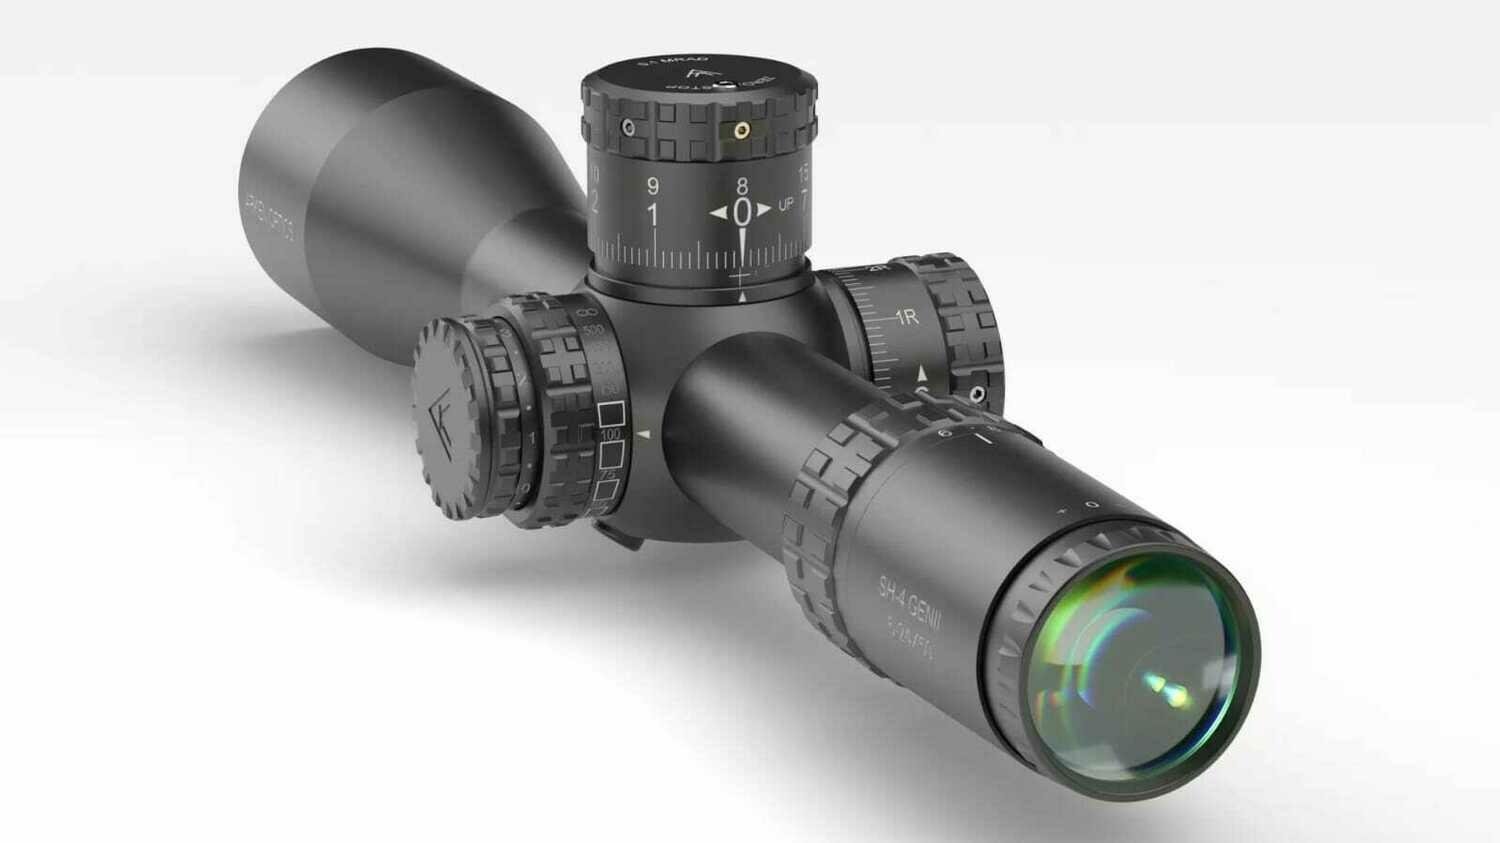 ARKEN OPTICS SH4 6-24 Illuminated Reticle with Zero Stop - 34mm Tube - $449.99 SHIPPED w/Coupon Code "SAVE$170" for free Combo Pack